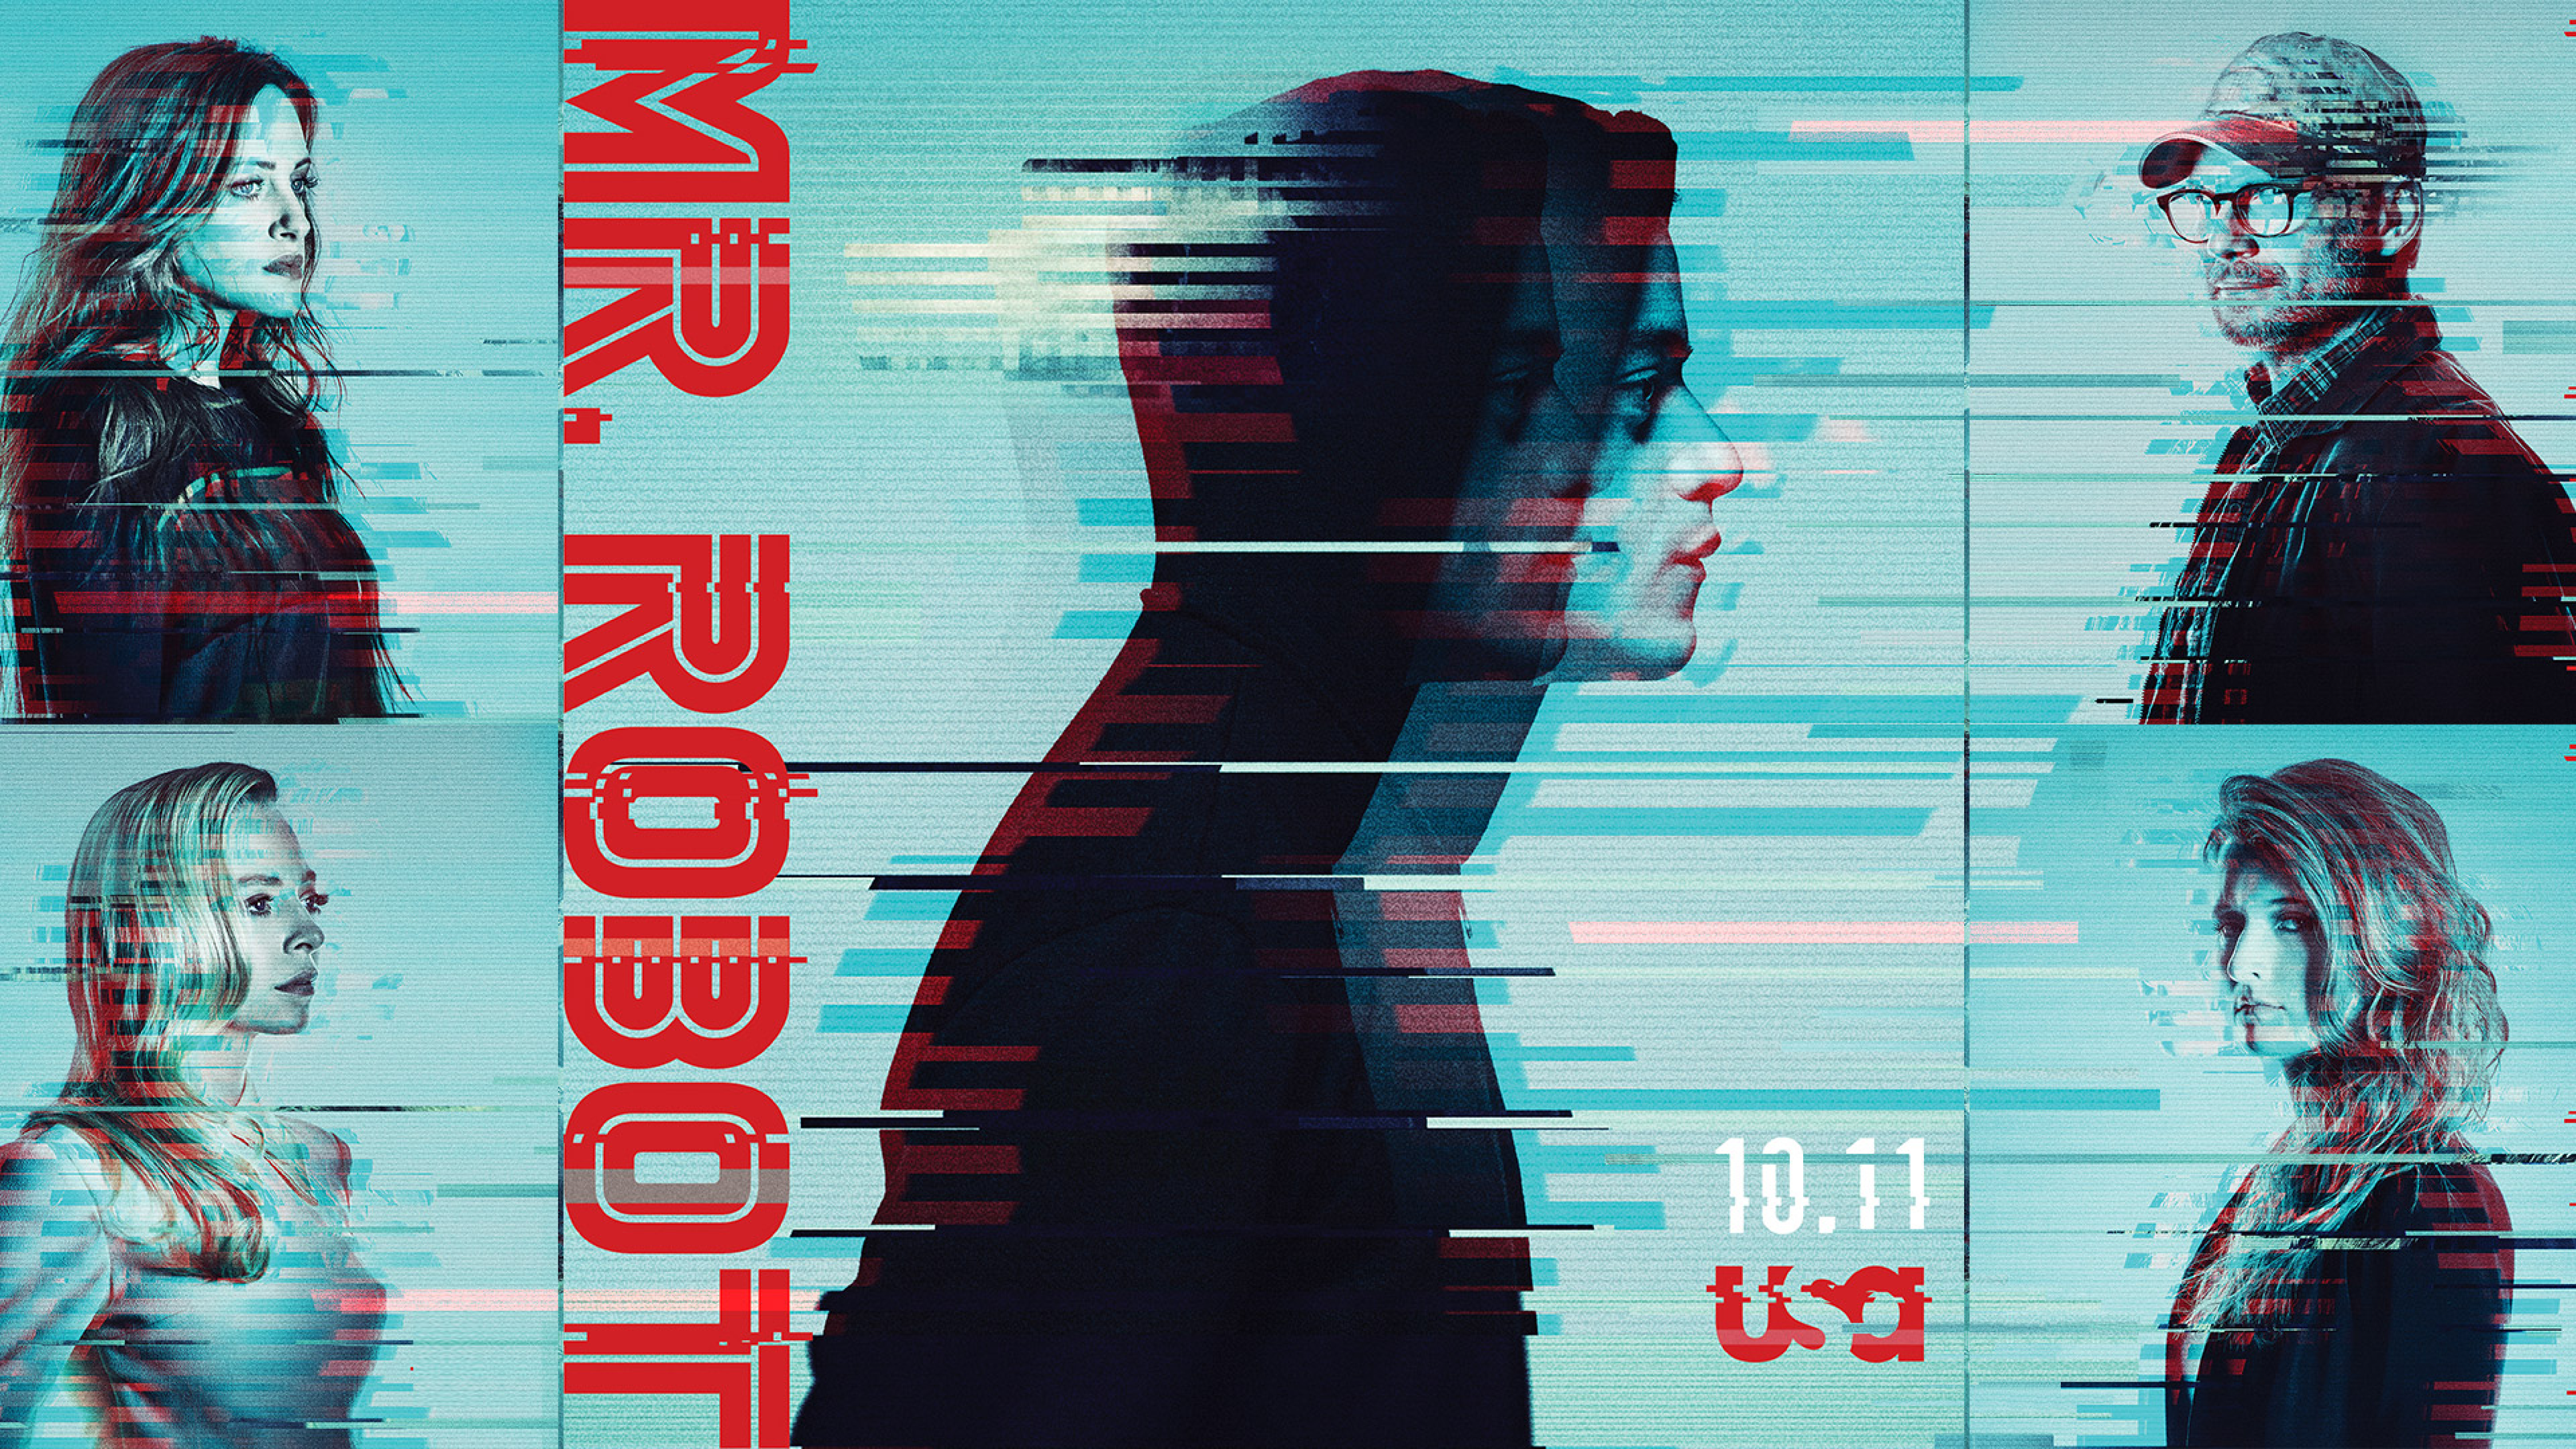 Mr Robot Elliot 4k Wallpaper,HD Tv Shows Wallpapers,4k Wallpapers,Images, Backgrounds,Photos and Pictures